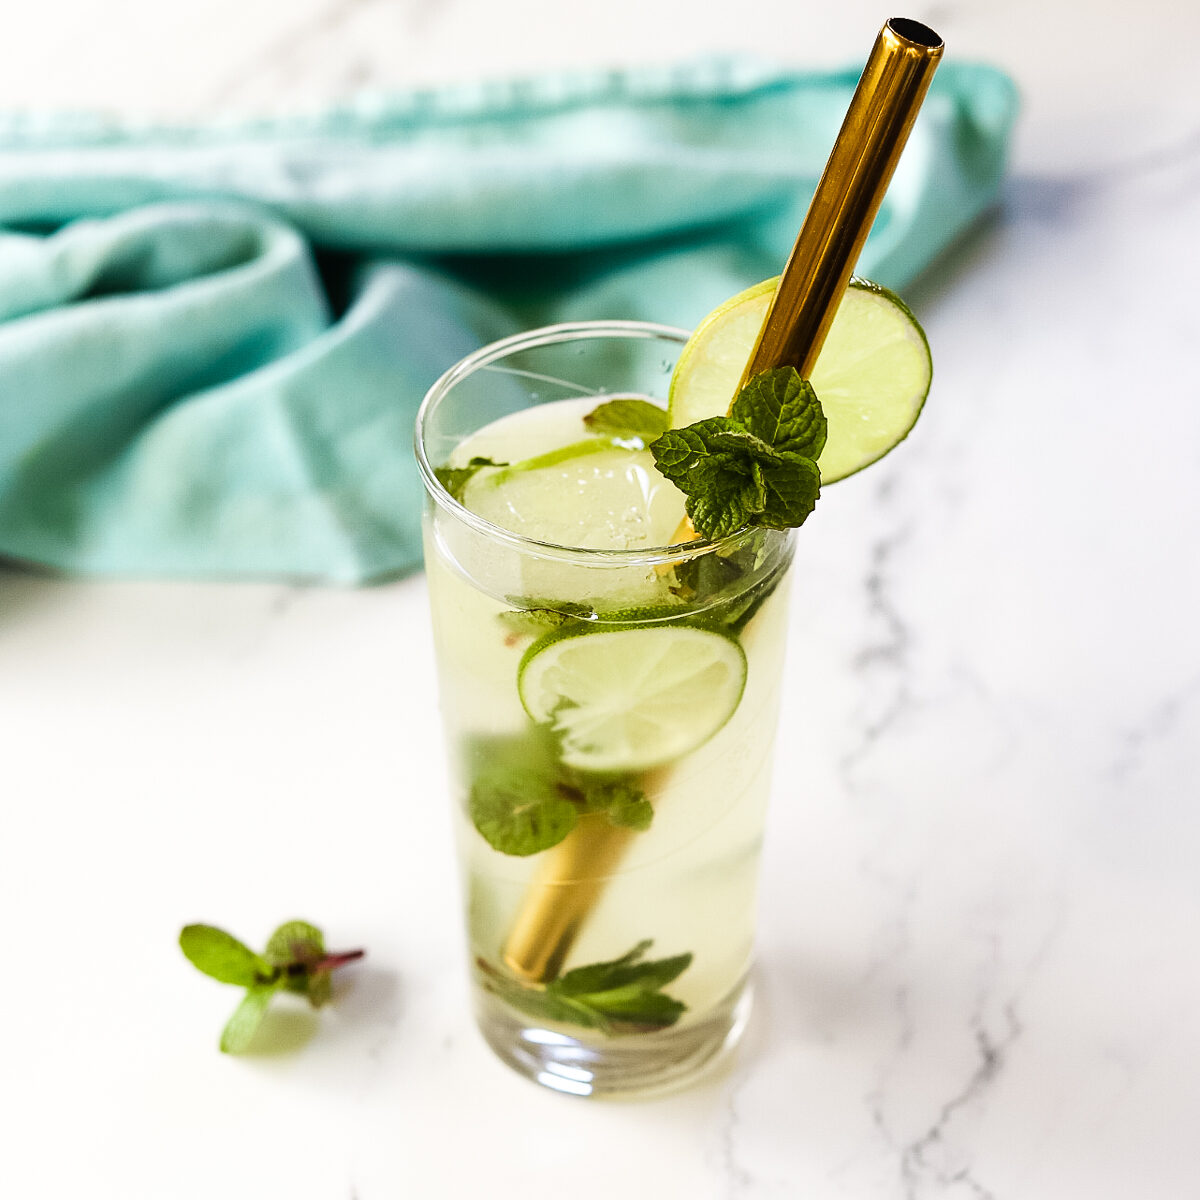 The finished gin mojito on a white countertop with blue tea towel in background. There are pieces of lime and mint floating in the icy cocktail and the metal straw is in diagonally.